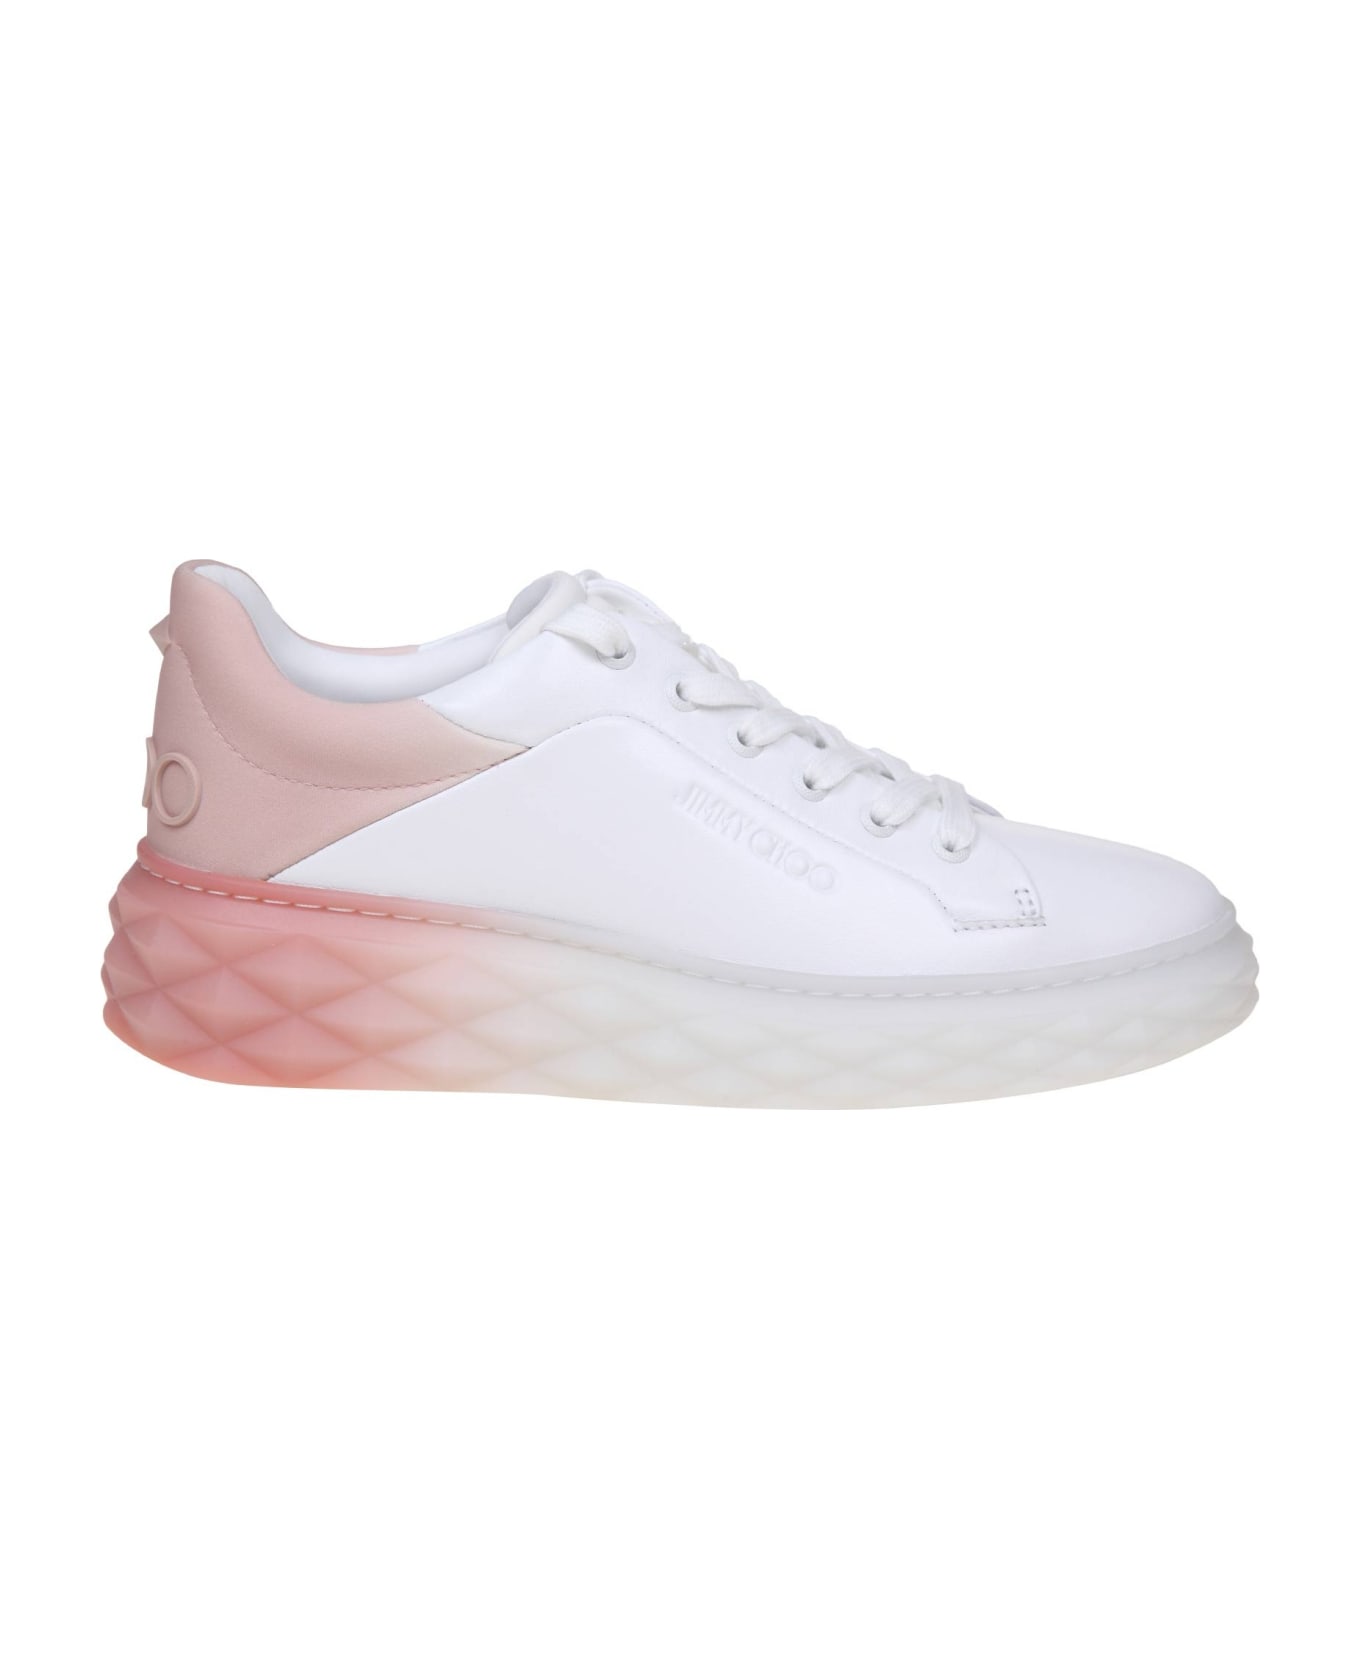 Jimmy Choo Diamond Maxi Sneakers In White And Pink Leather - WHITE/MACARON MIX